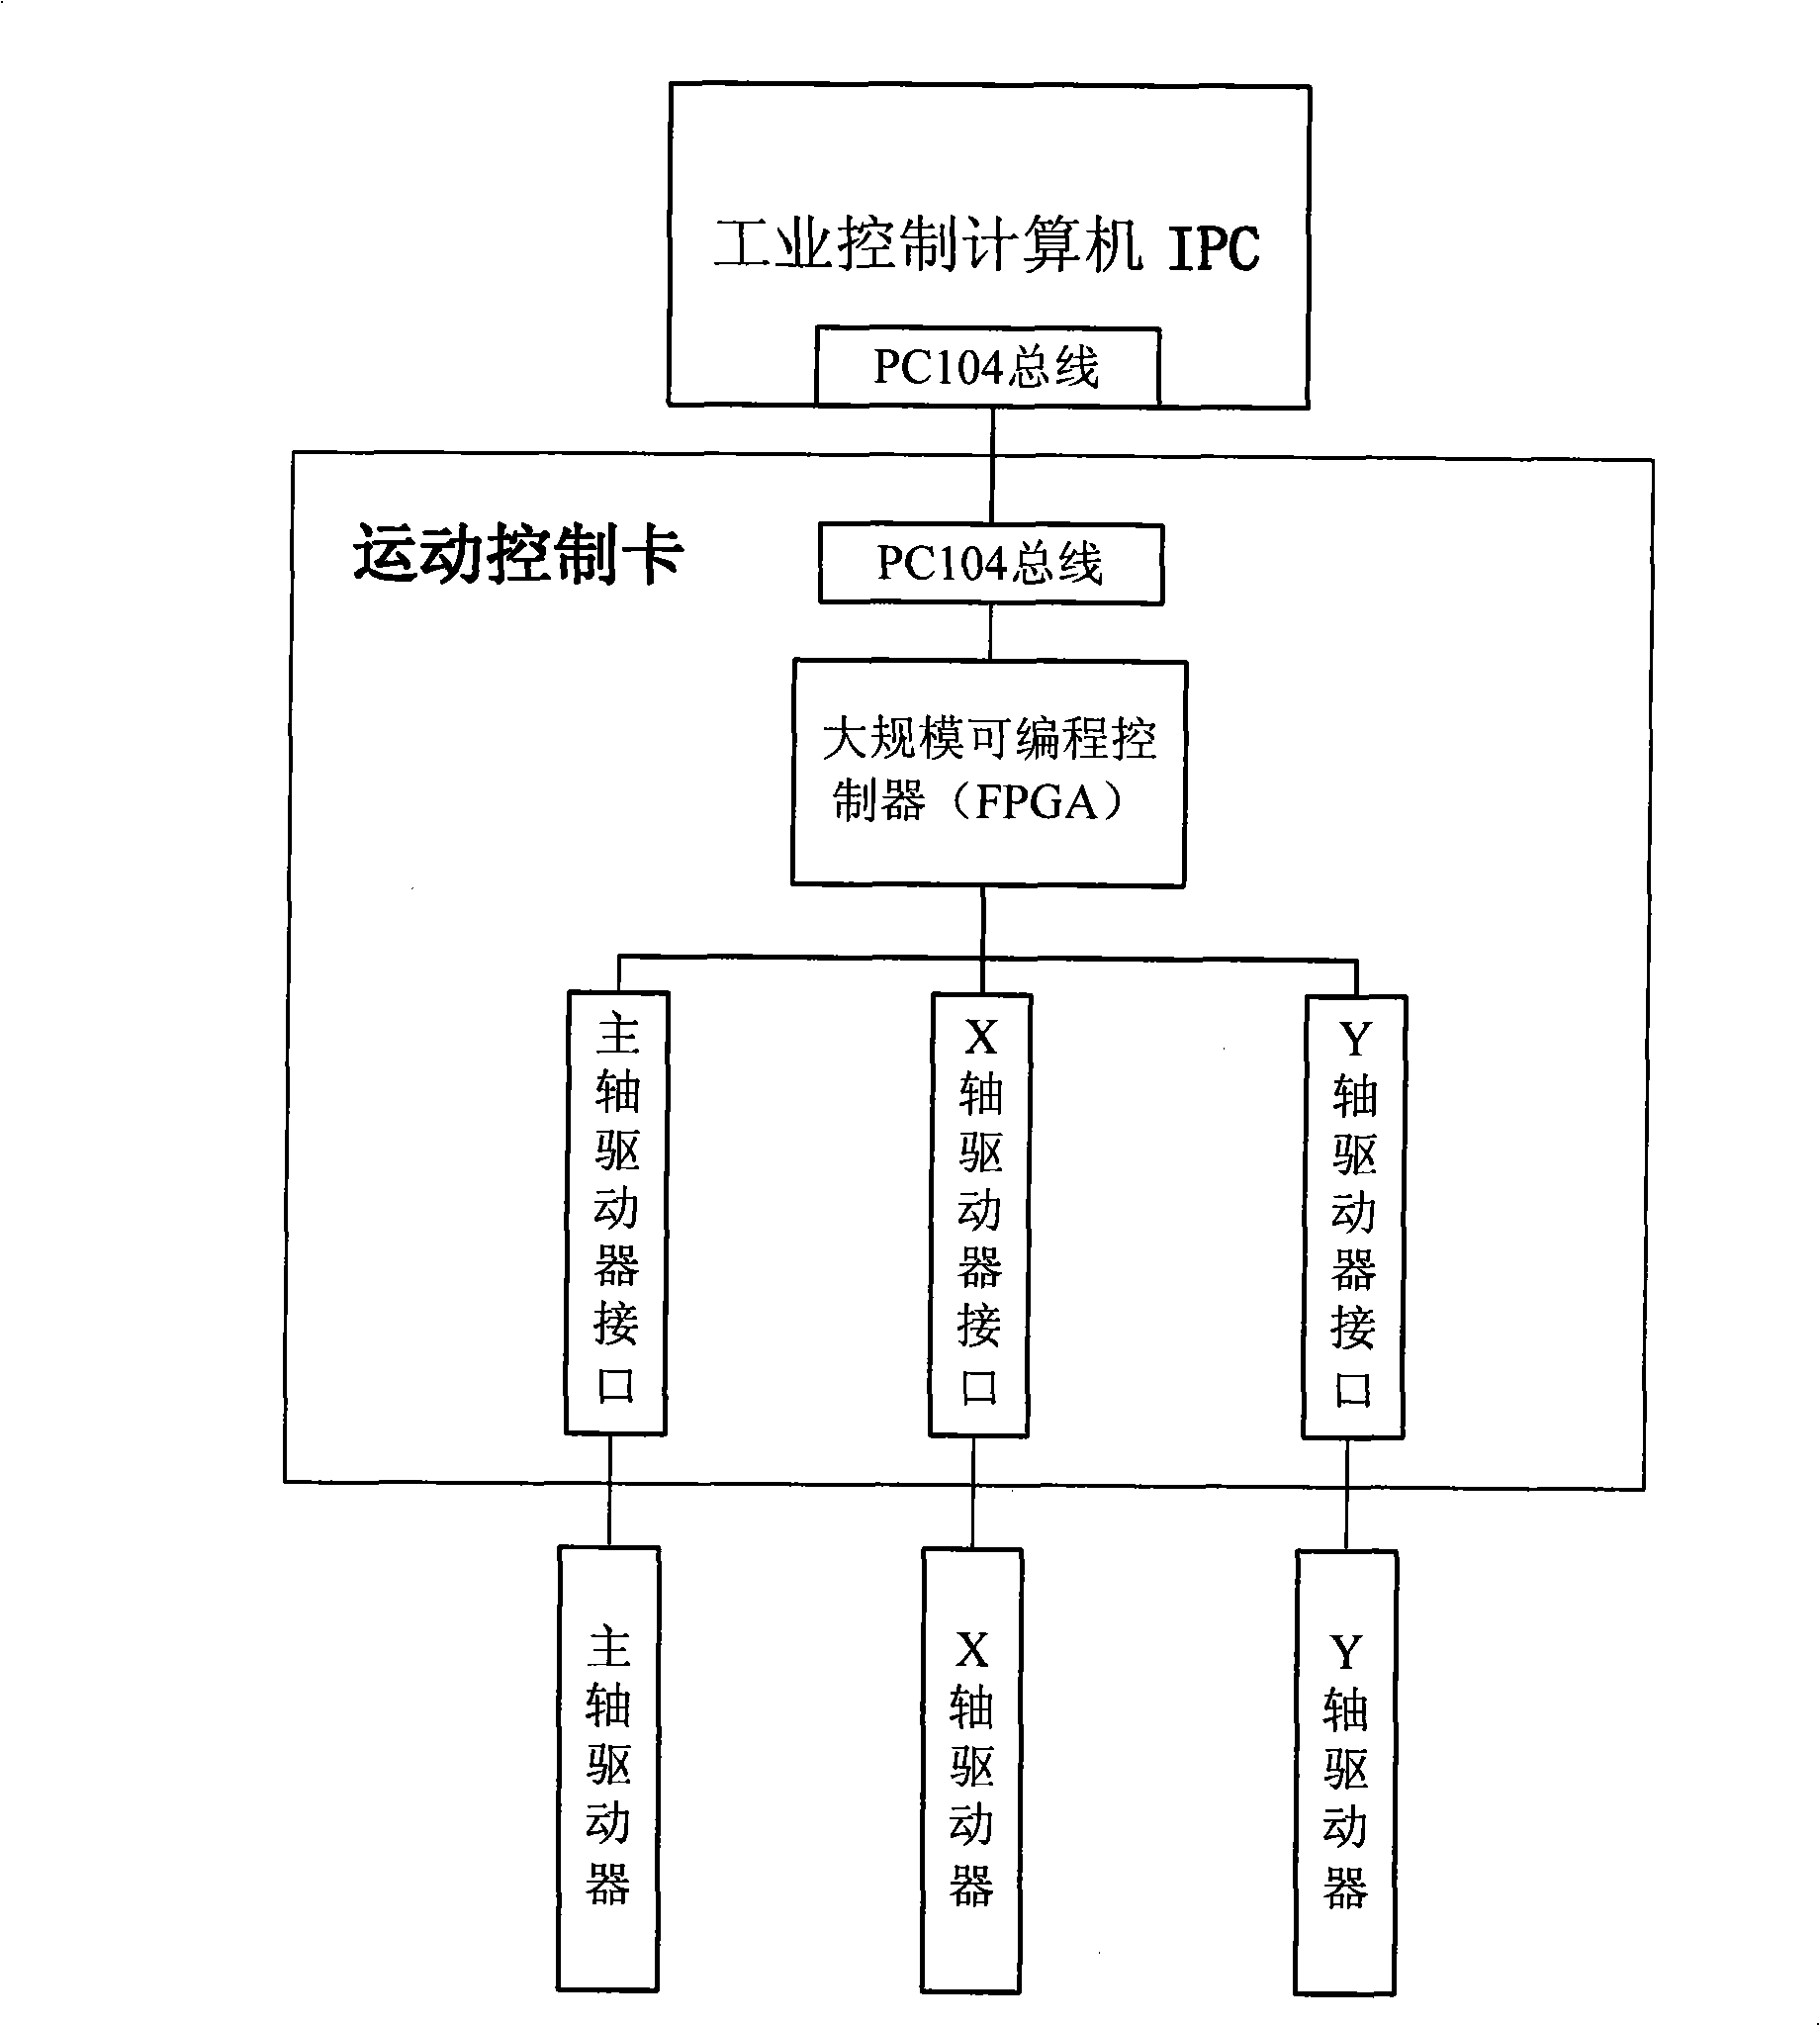 Method for controlling the motion of computerized pattern sewing machines